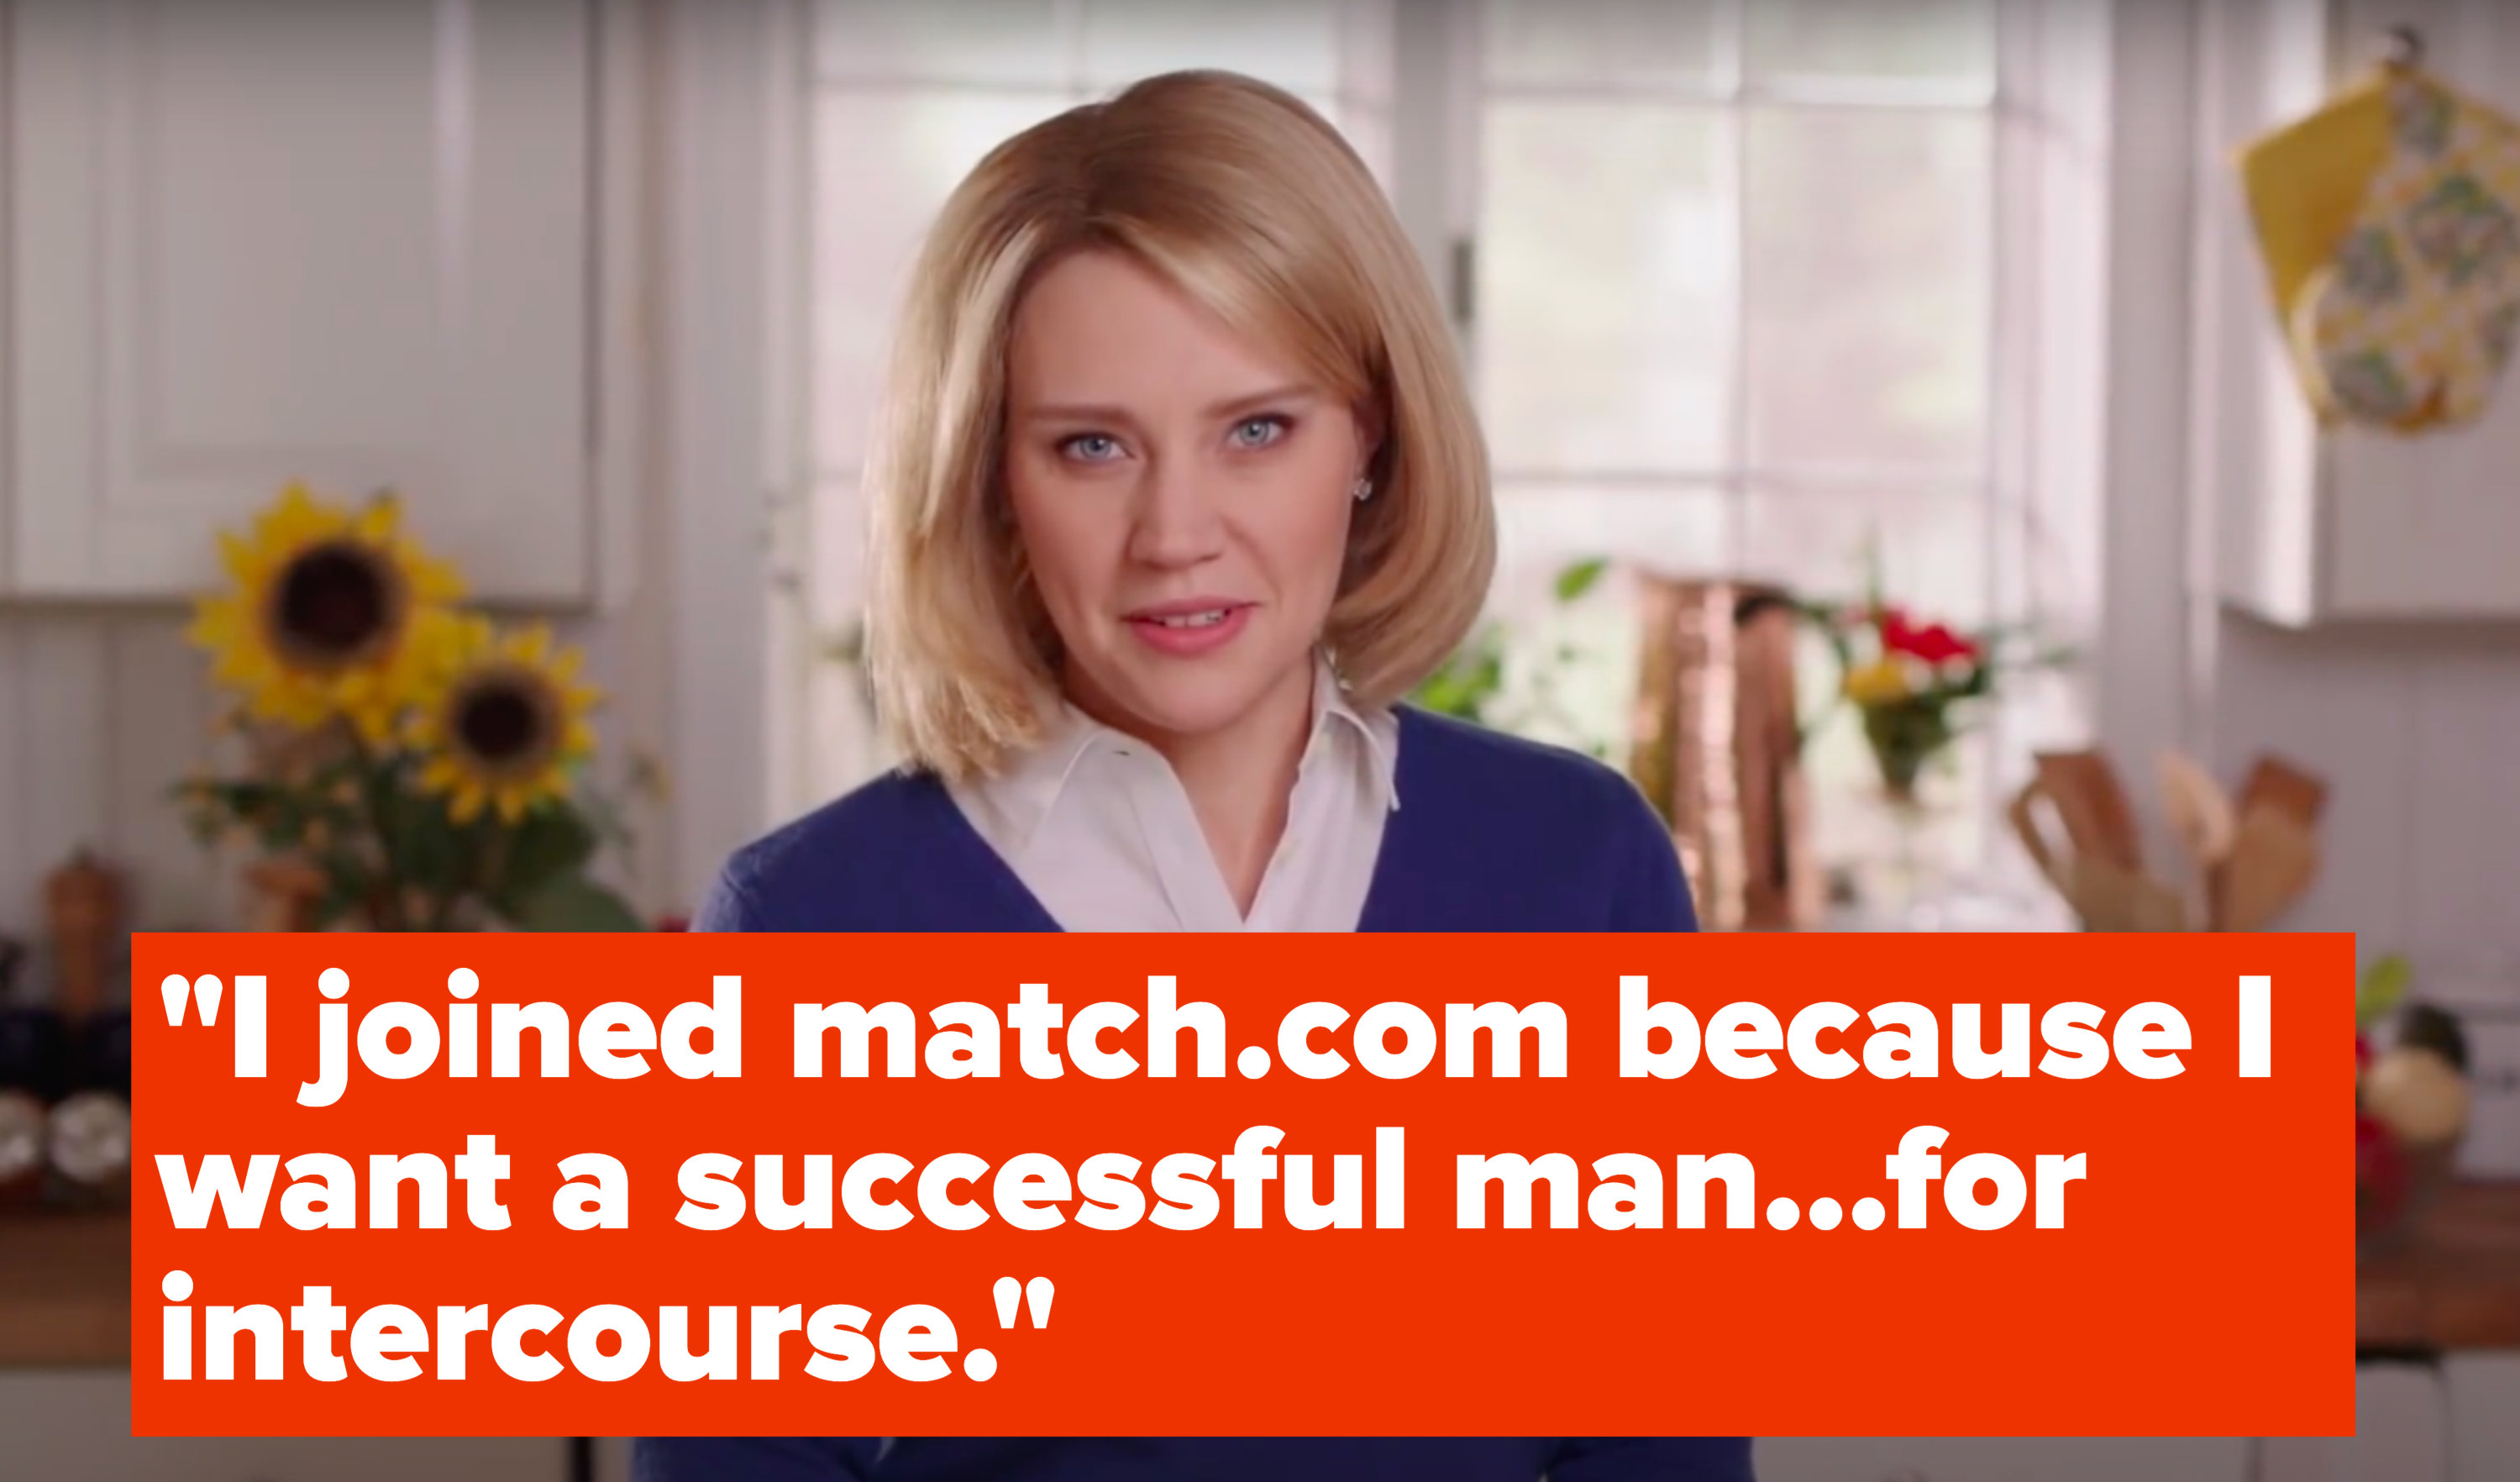 Kate McKinnon, as Martha Stewart, says, &quot;I joined match.com because I wanted a successful man...for intercourse&quot;